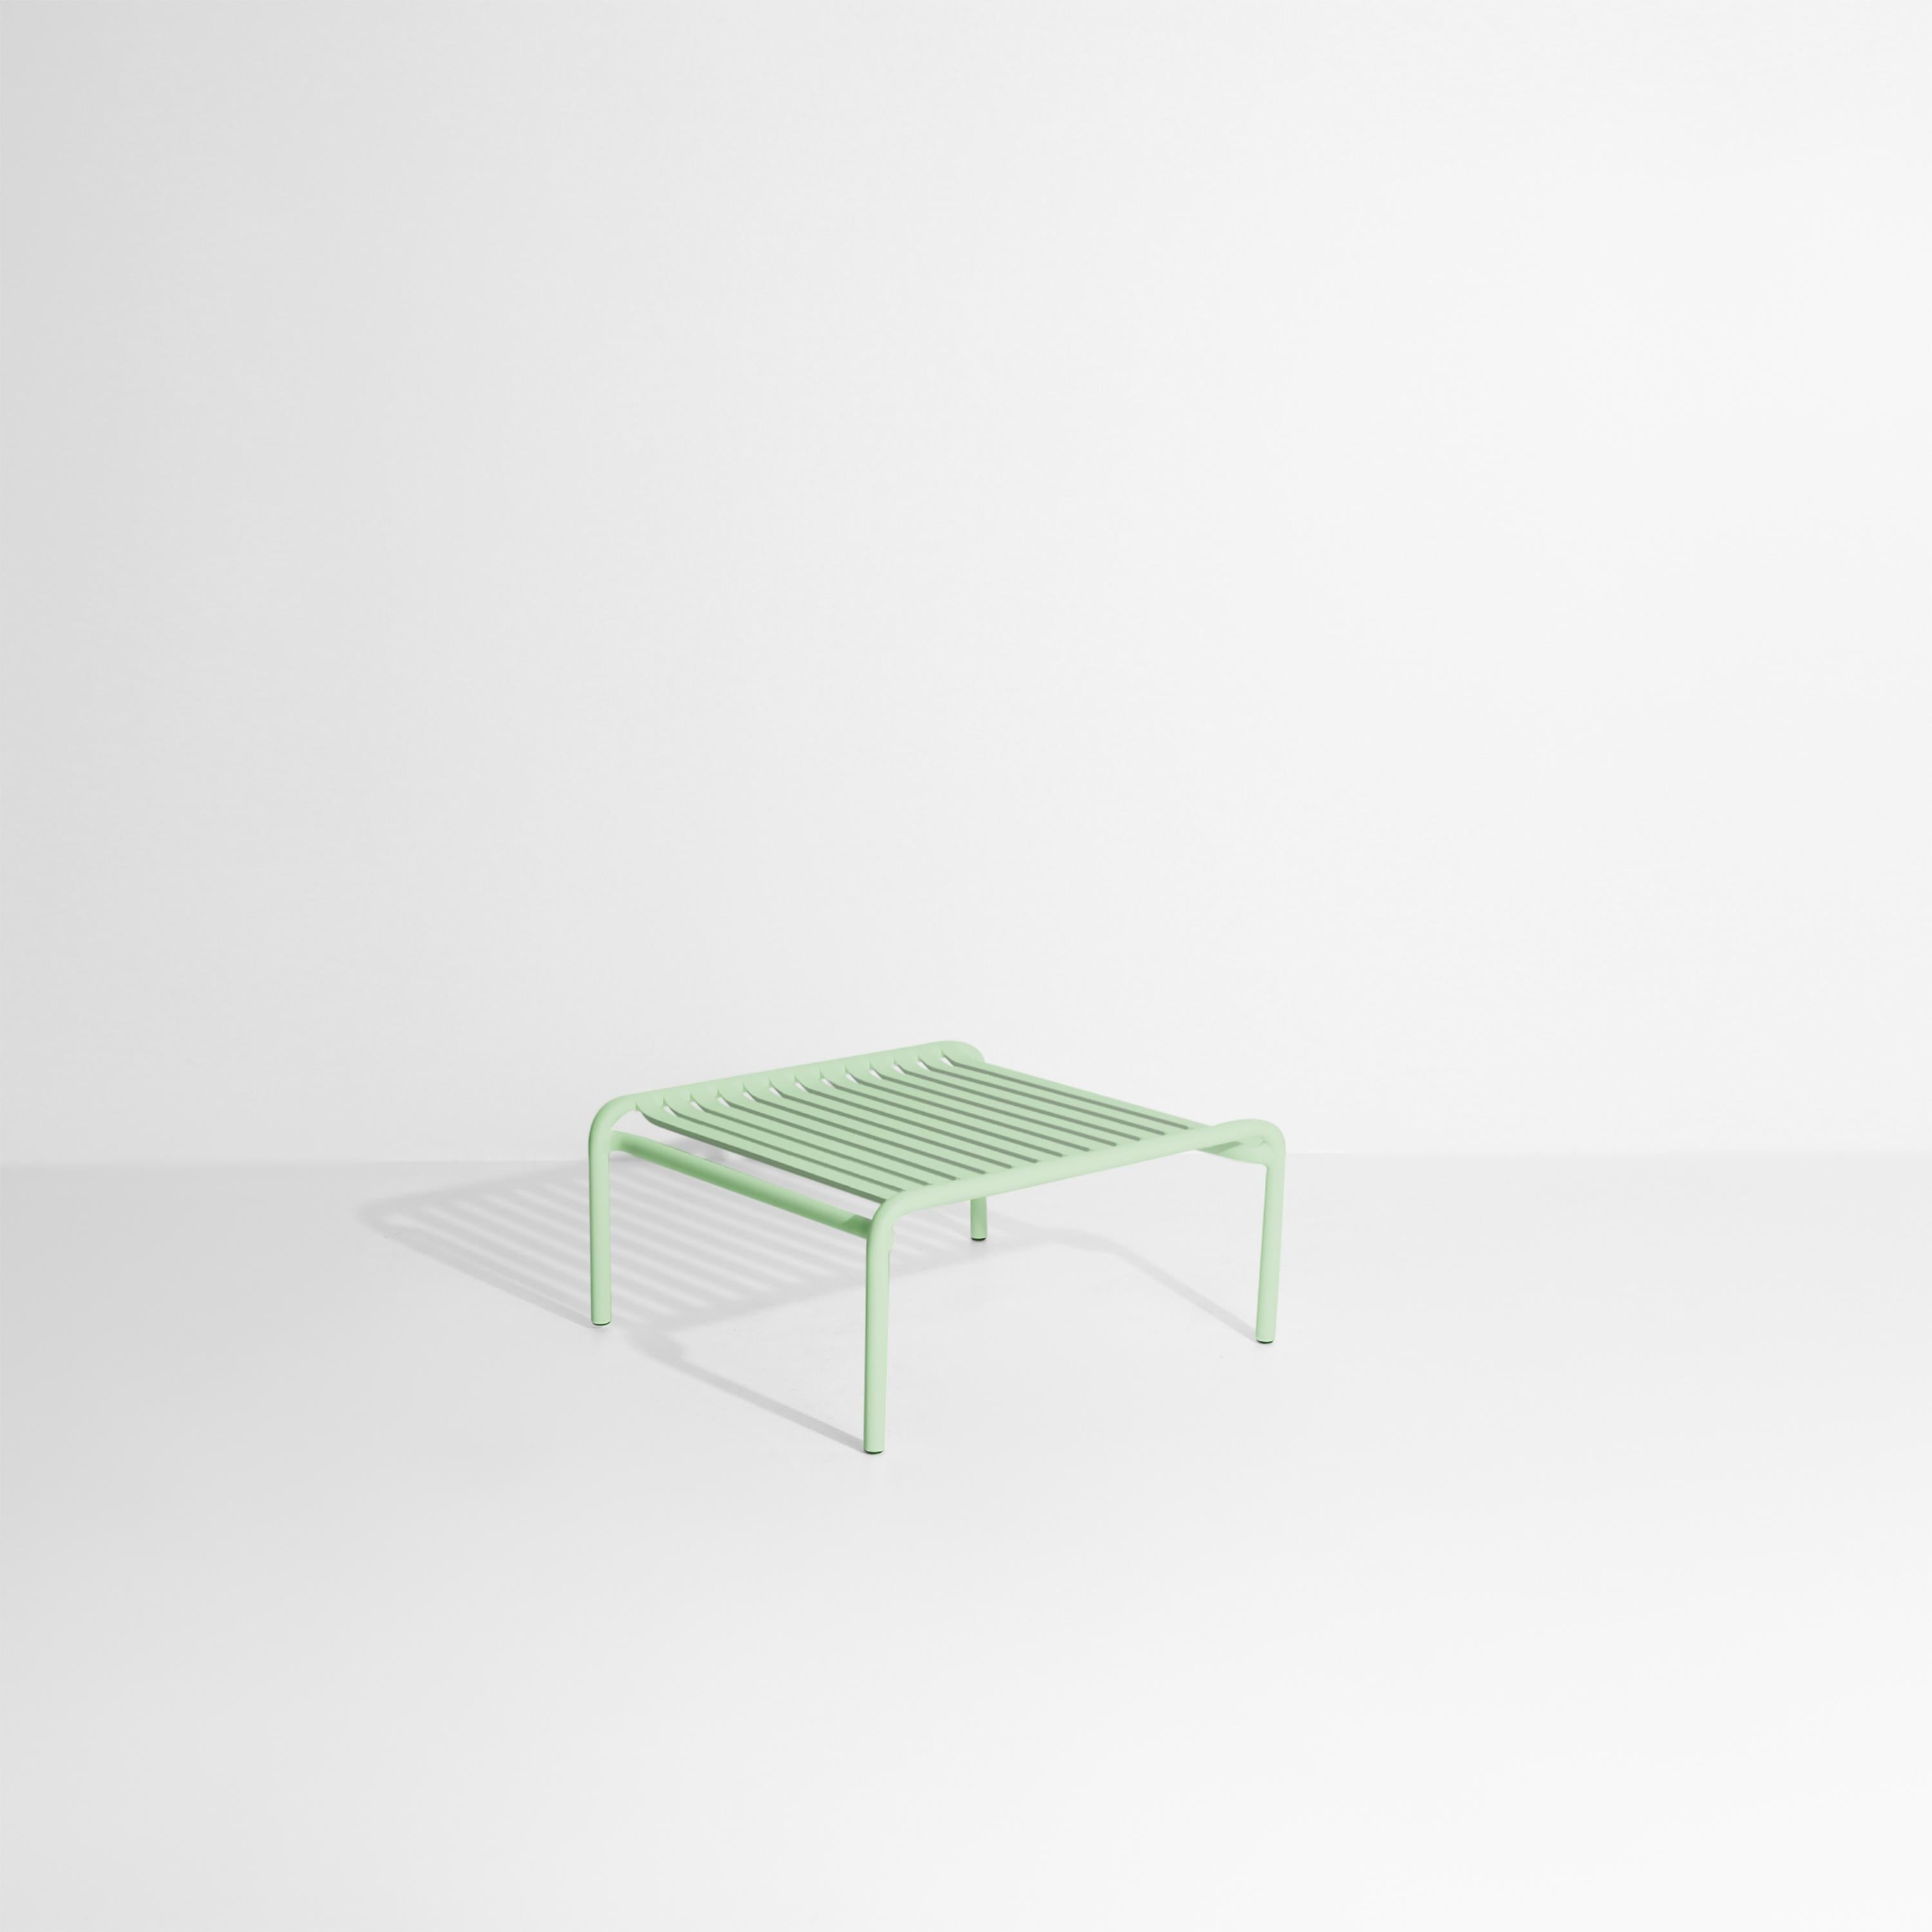 Petite Friture Week-End Coffee Table in Pastel Green Aluminium by Studio BrichetZiegler, 2017

The week-end collection is a full range of outdoor furniture, in aluminium grained epoxy paint, matt finish, that includes 18 functions and 8 colours